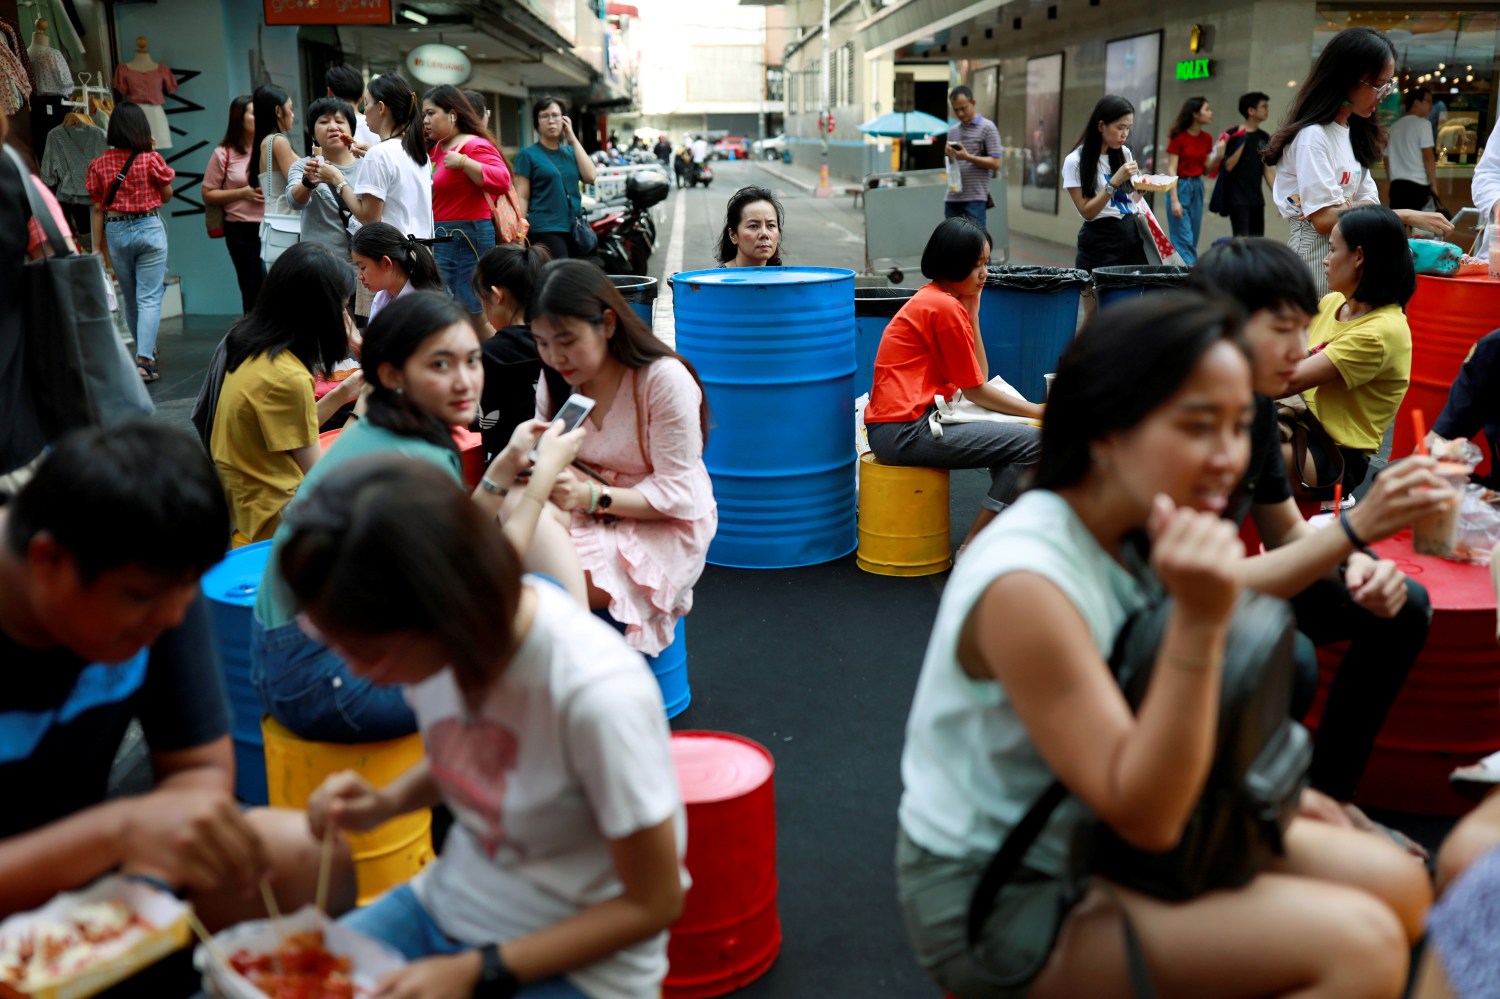 REFILE - CORRECTING STYLE People spend their time at a street food market in Bangkok, Thailand August 25, 2019. REUTERS/Soe Zeya Tun - RC1EAEB197C0